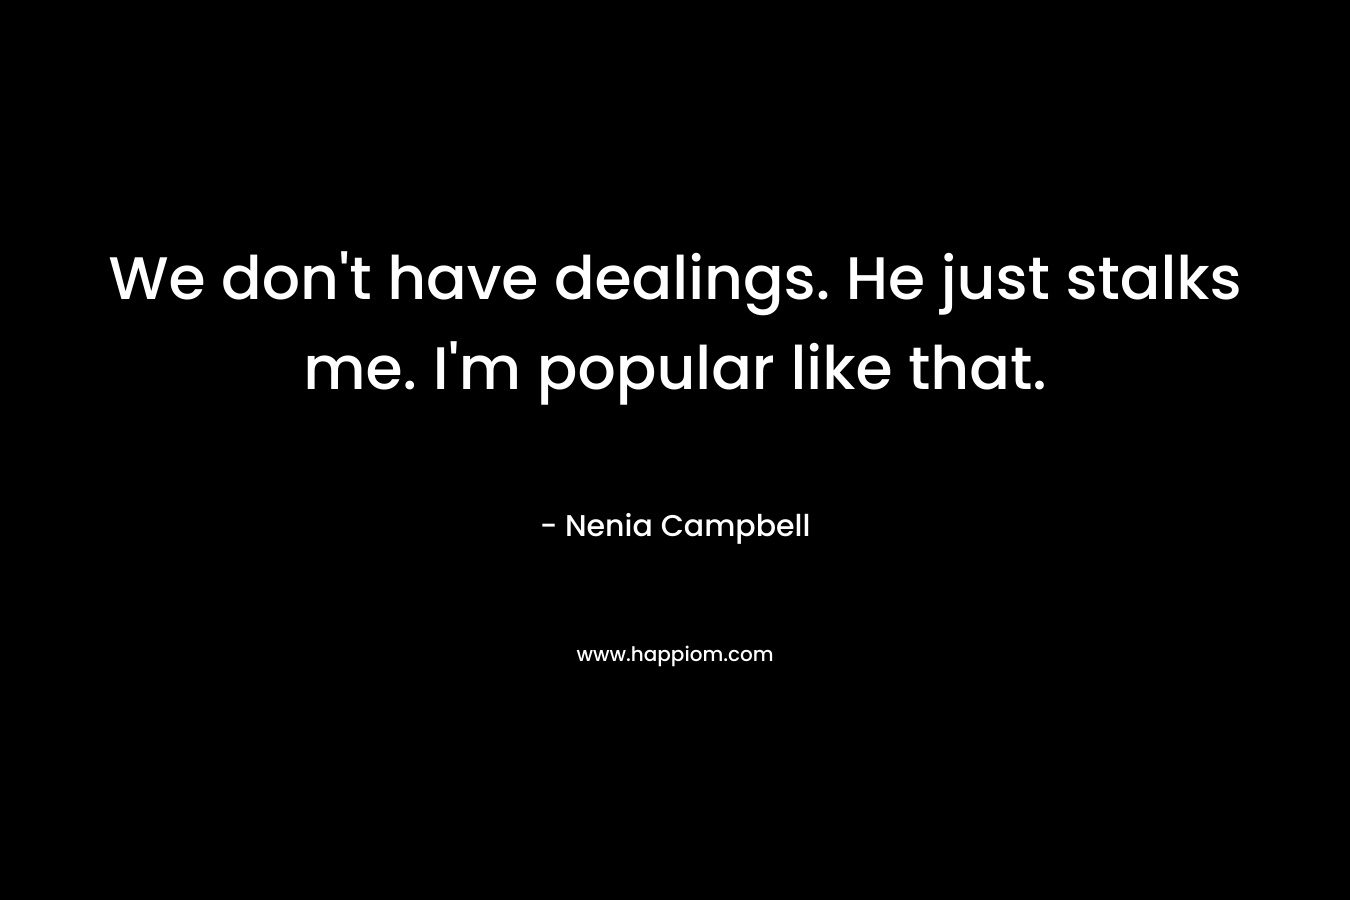 We don’t have dealings. He just stalks me. I’m popular like that. – Nenia Campbell